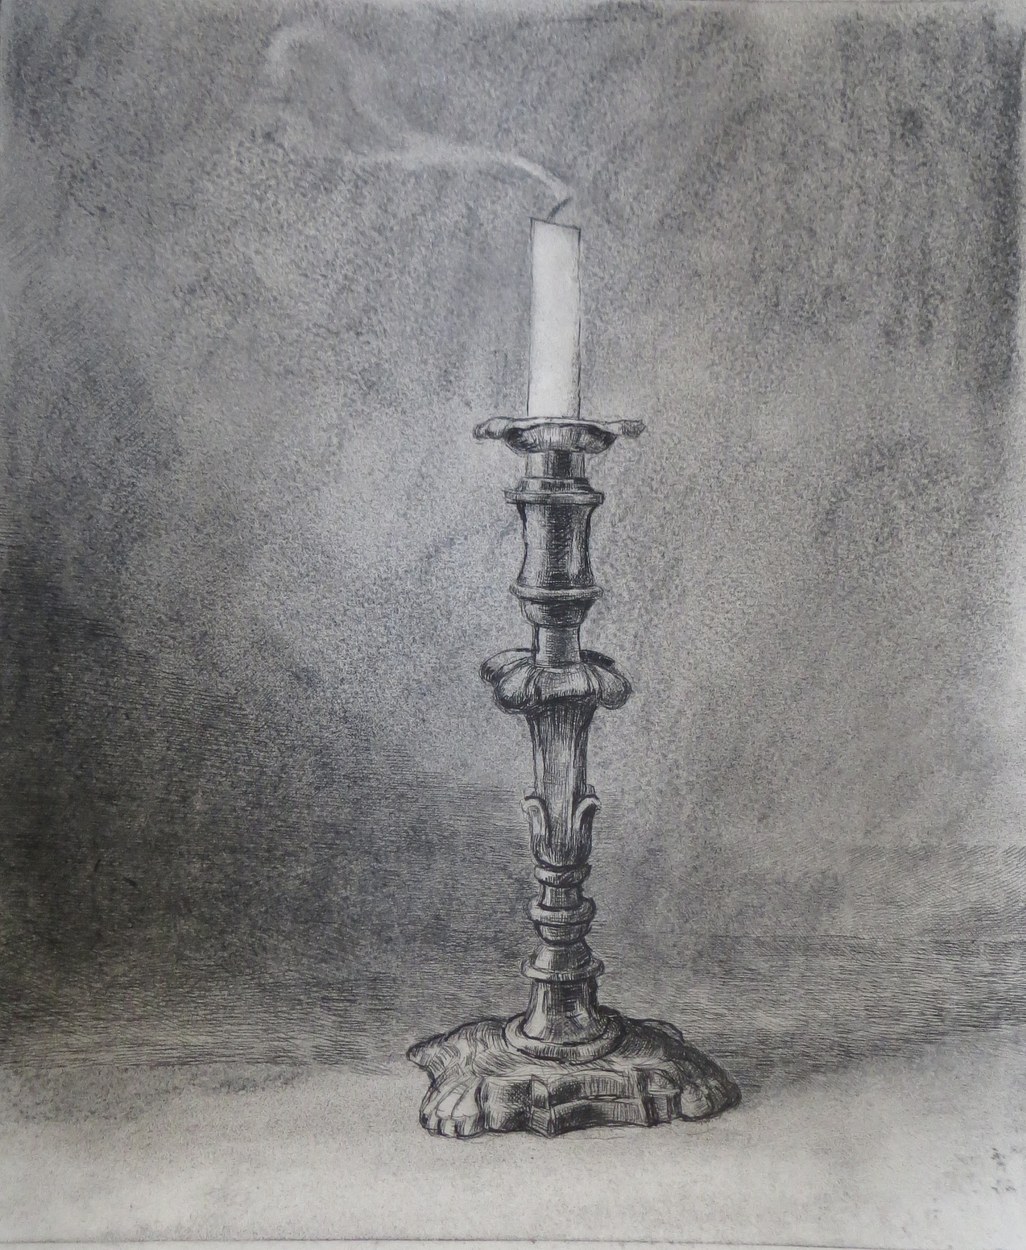 Candlestick, drypoint, image size 25 x 30 cm., edition of 20, £160